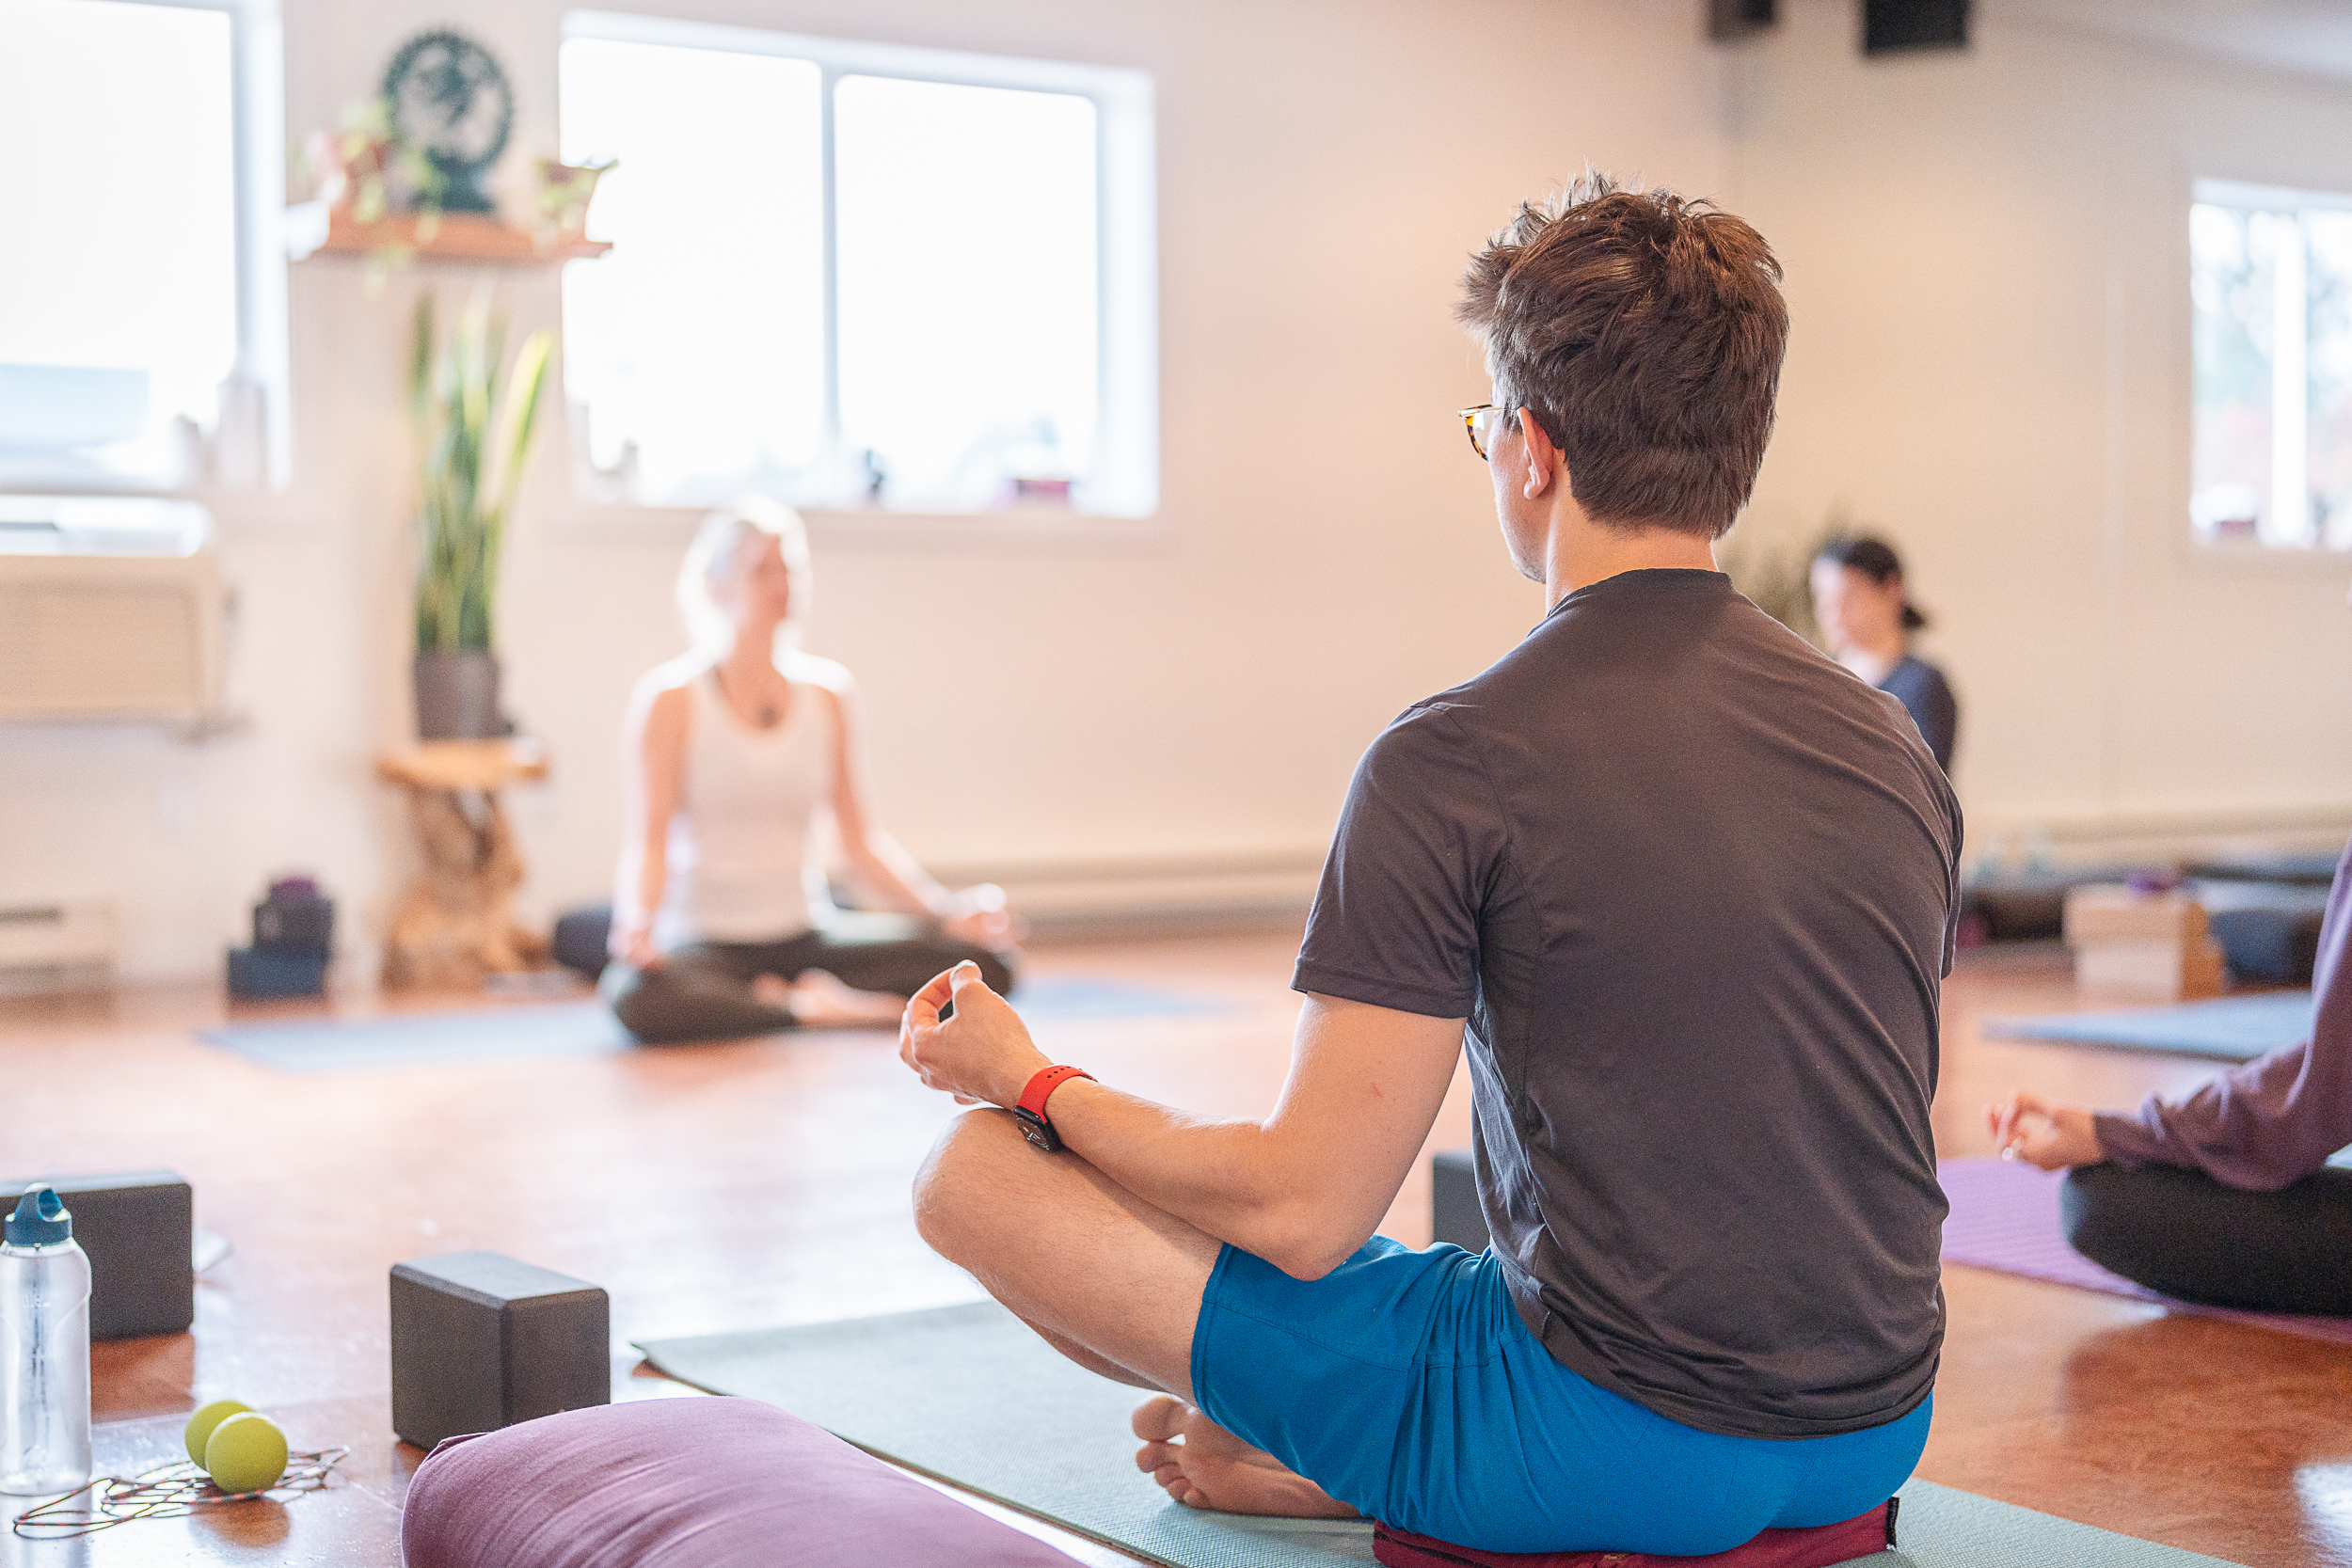 Focused yoga participants engaged in a meditation session, with a man in the foreground in a cross-legged pose, embodying mindfulness and serenity at a Squamish yoga studio.